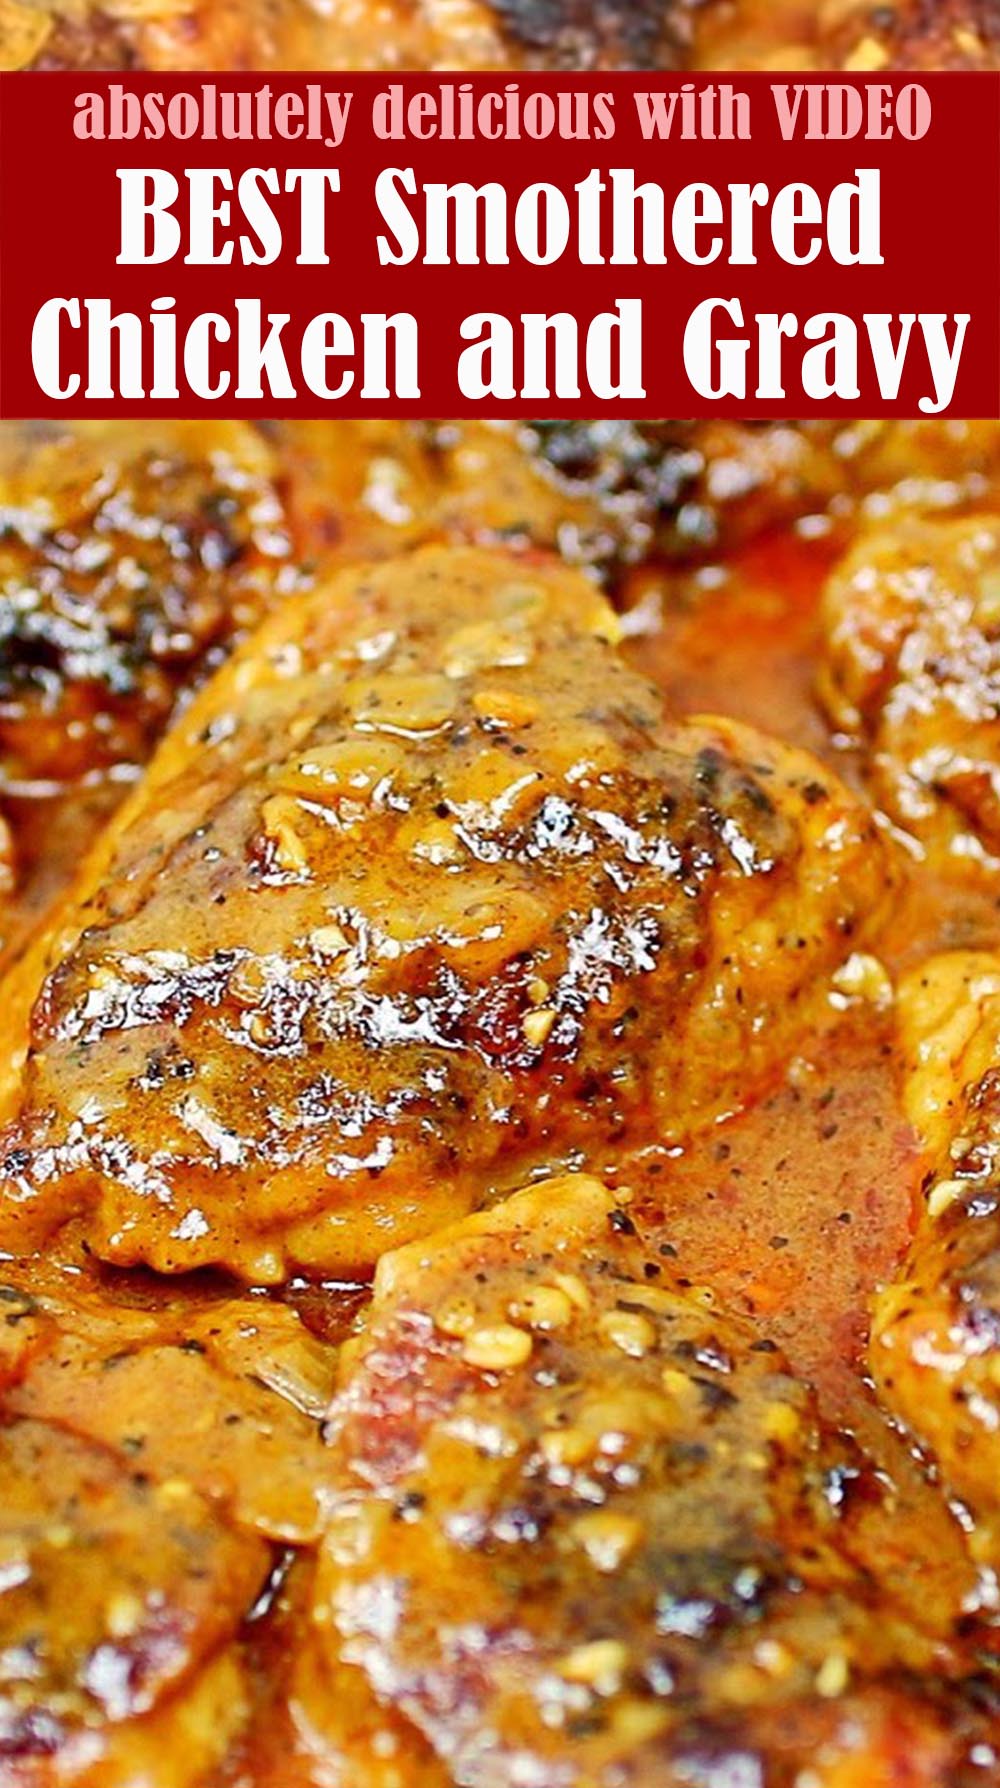 BEST Smothered Chicken and Gravy Recipe